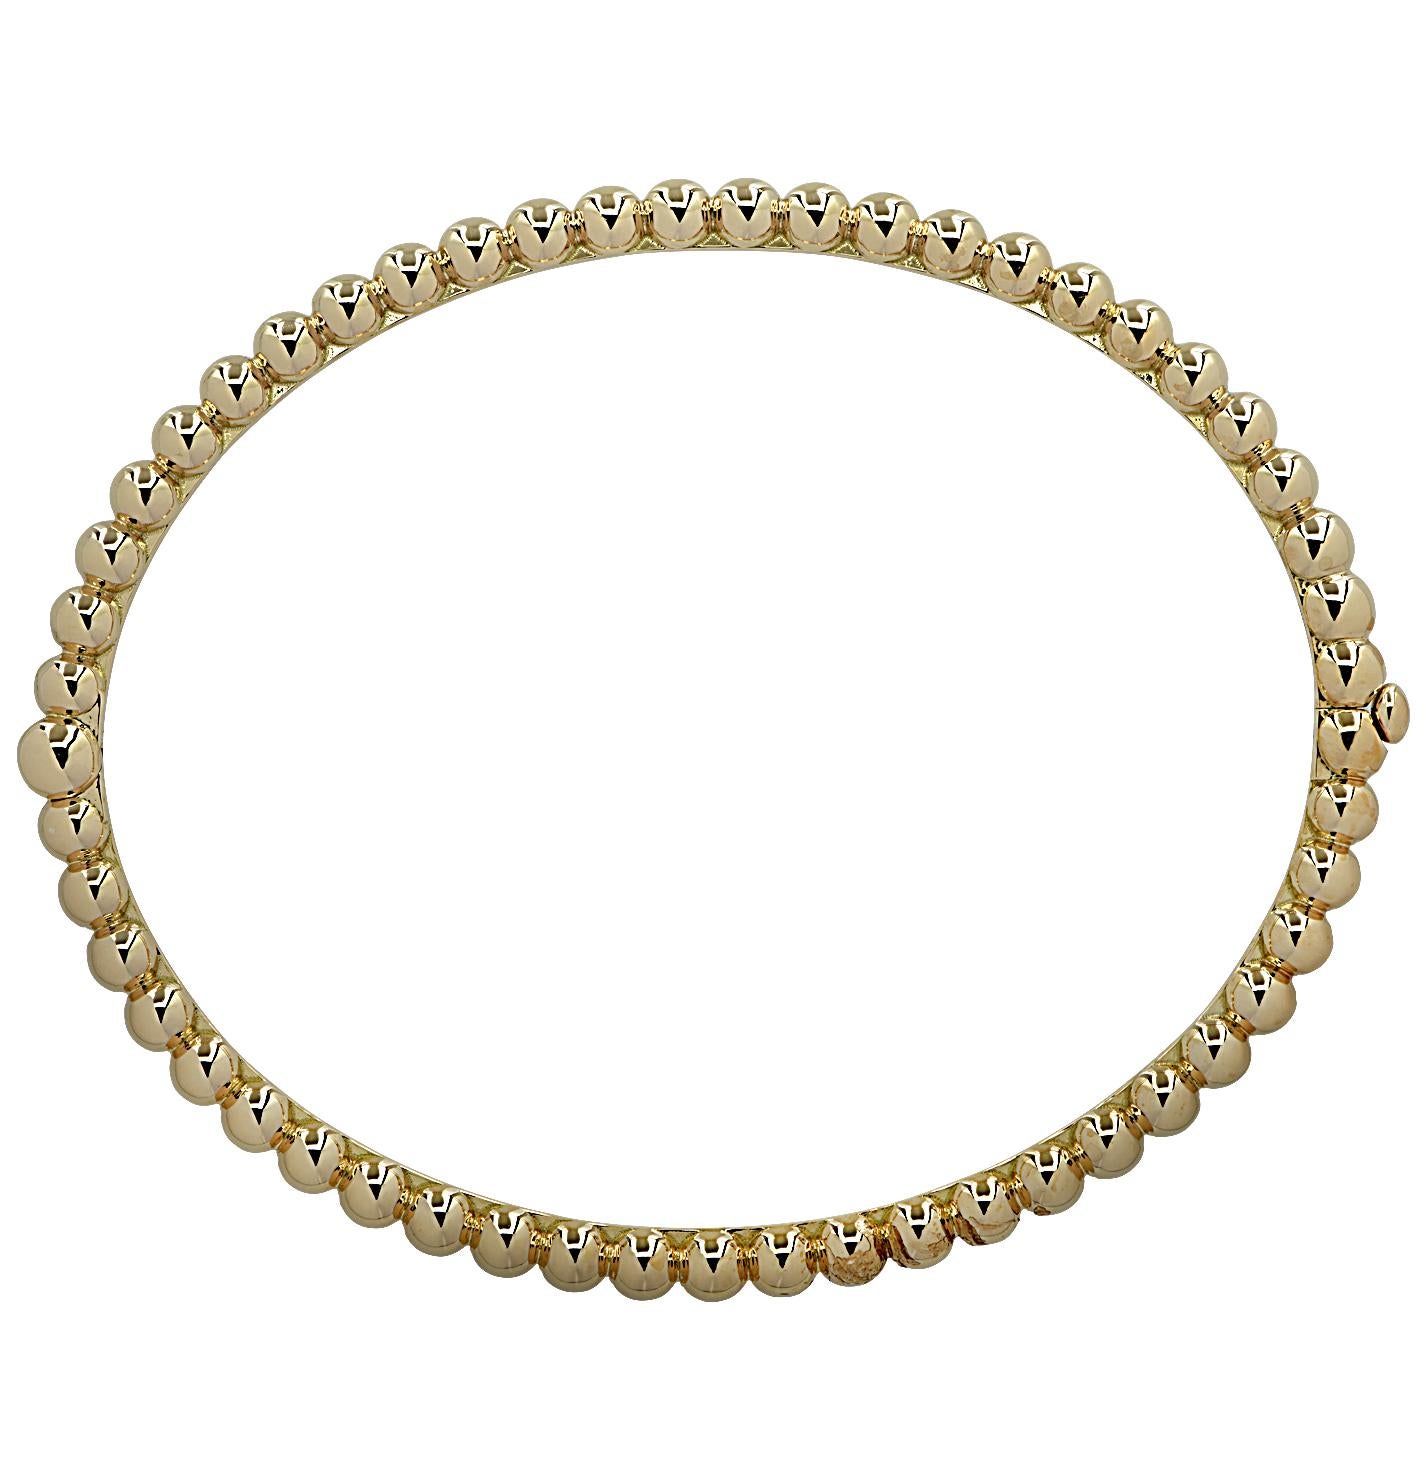 From the legendary House of Van Cleef & Arpels, this timelessly elegant Perlee Pearls of Gold Bracelet, is hand crafted in 18 karat yellow gold. The bracelet closes seamlessly with an invisible clasp. It measures 3.4 mm in width and is a wrist size